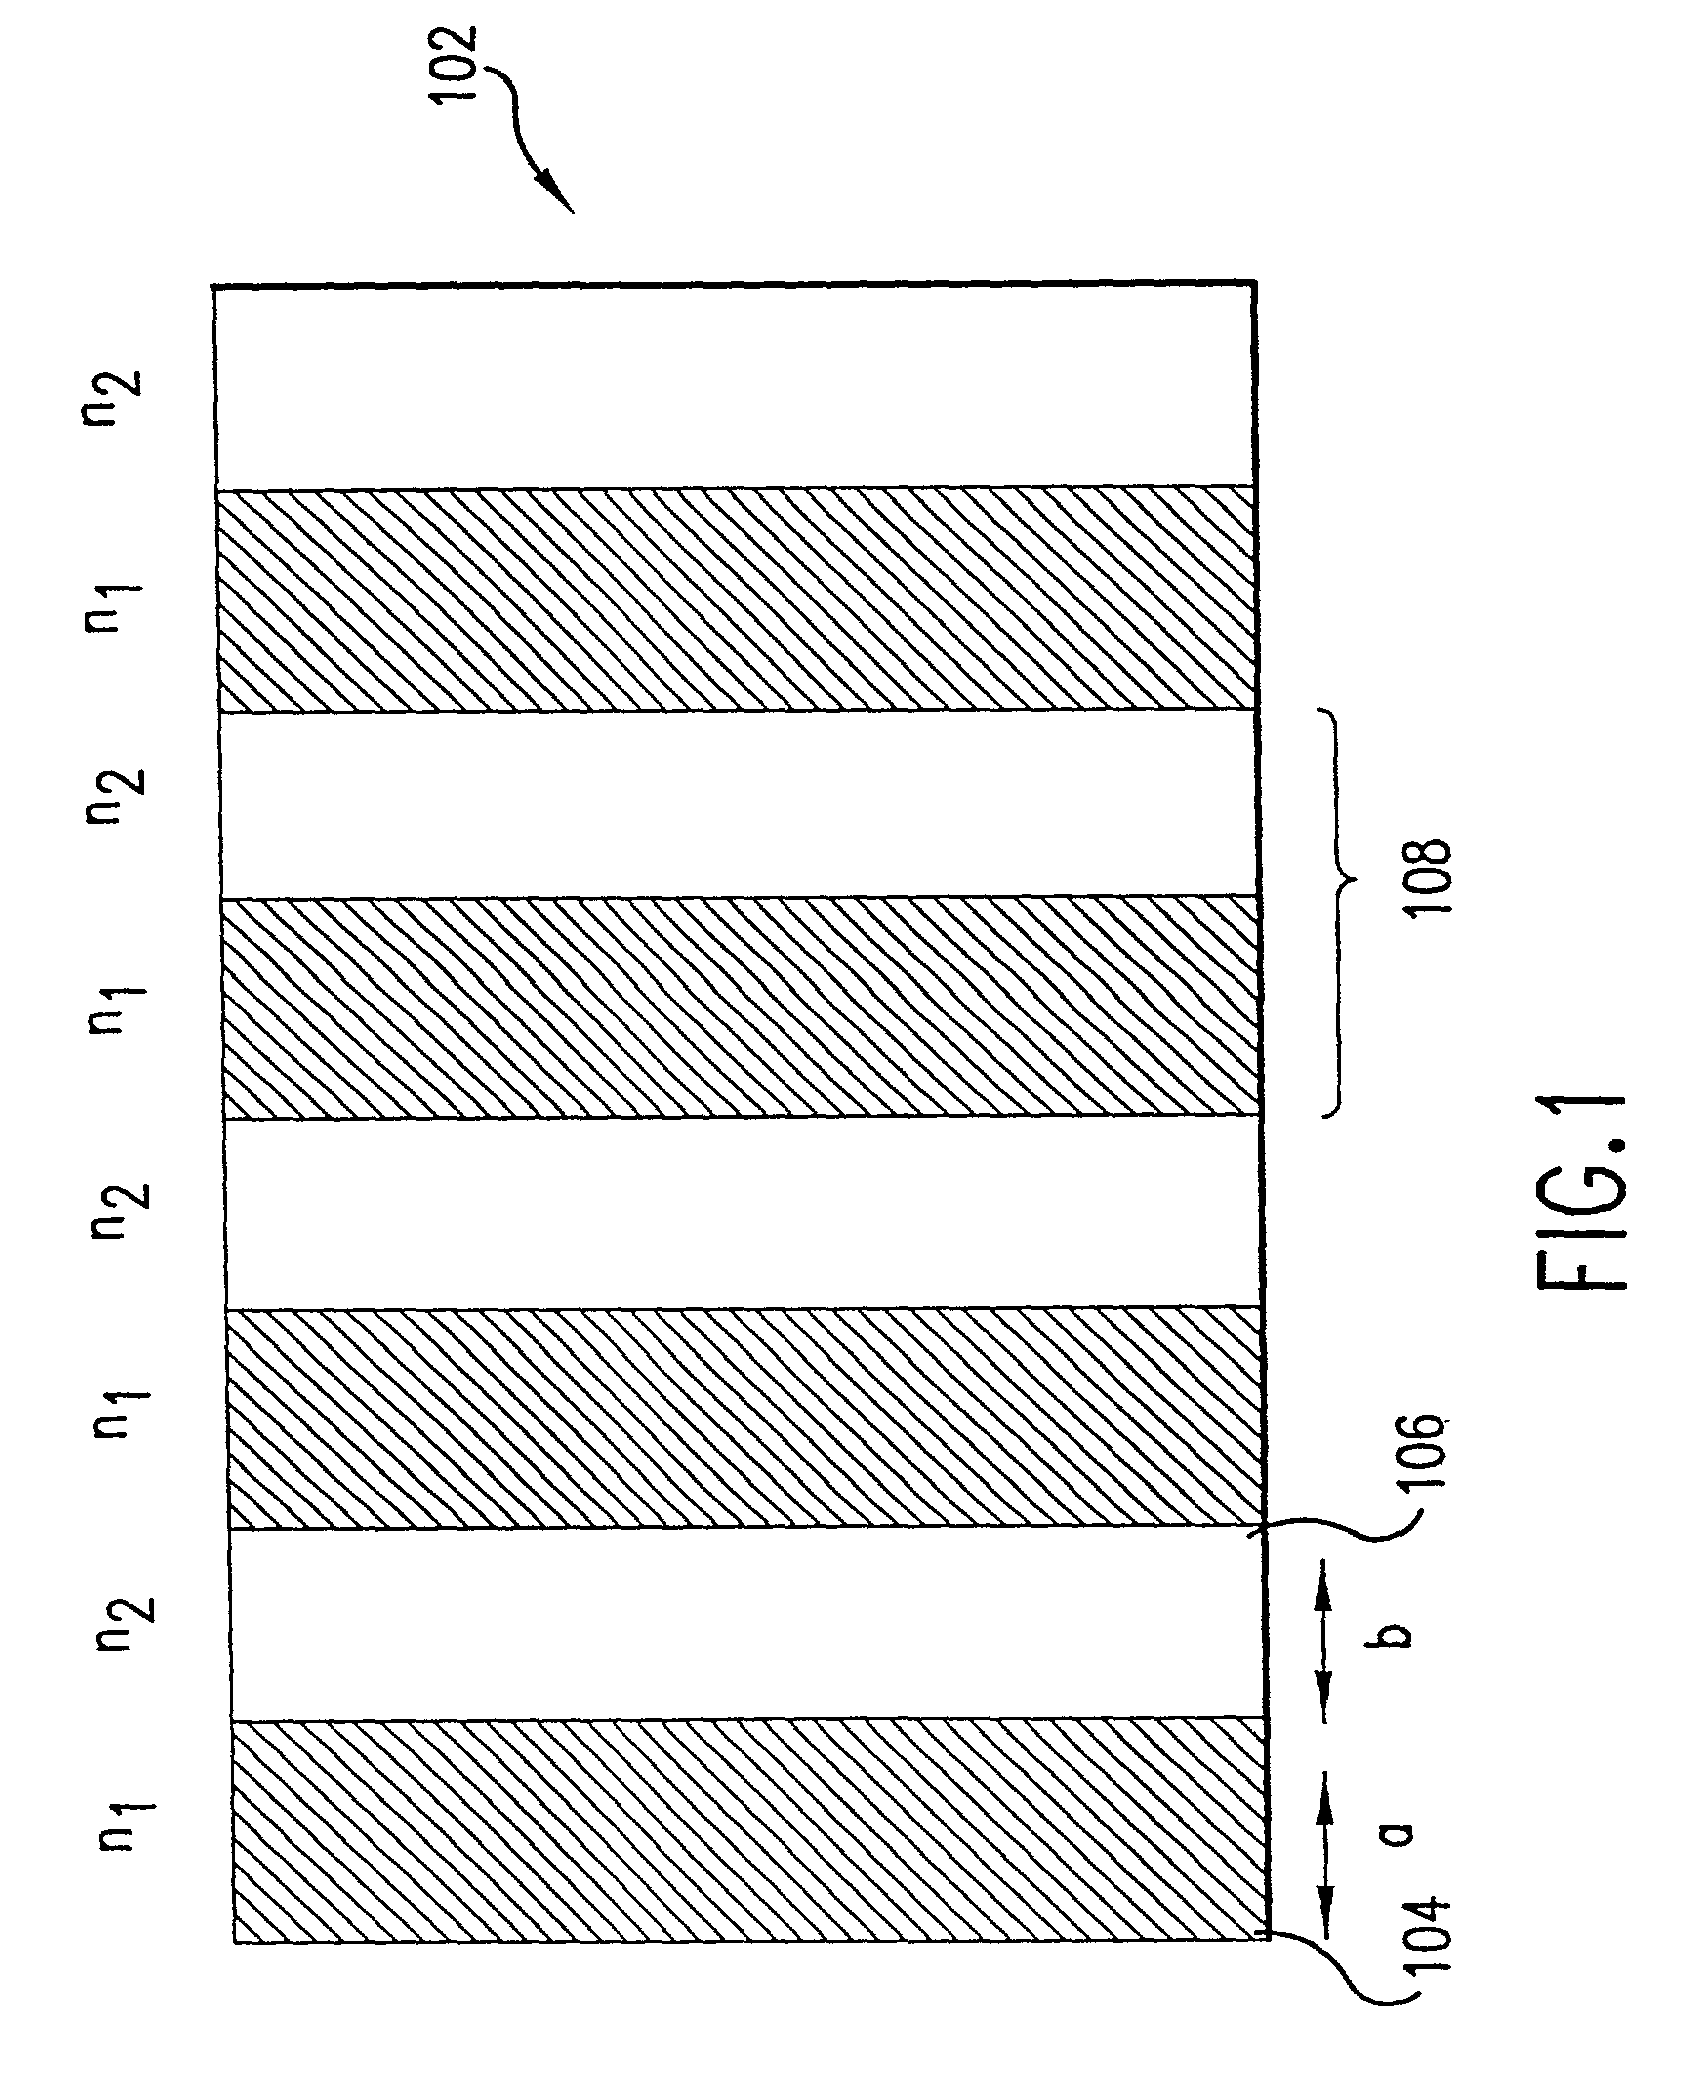 Liquid crystal display device and light emitting structure with photonic band gap transparent electrode structures